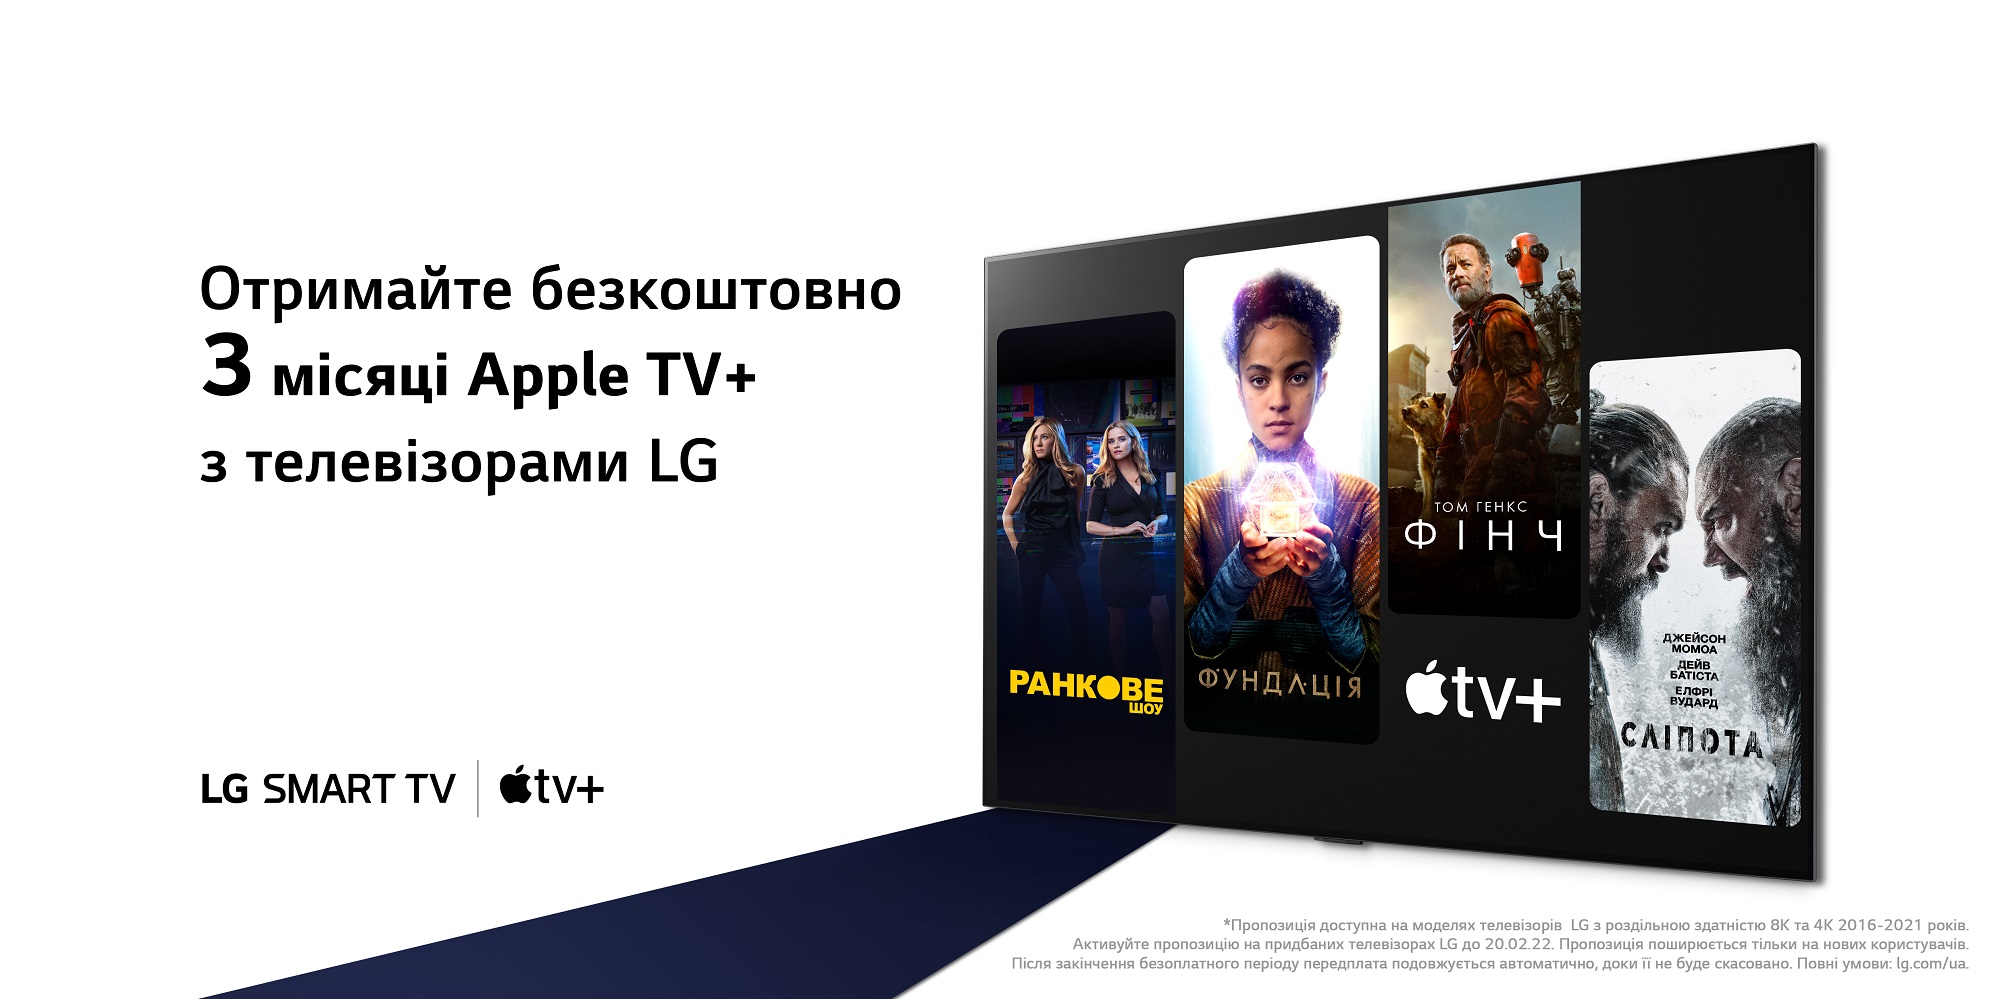 Three months free Apple TV+ on LG TVs - how to take advantage of the offer